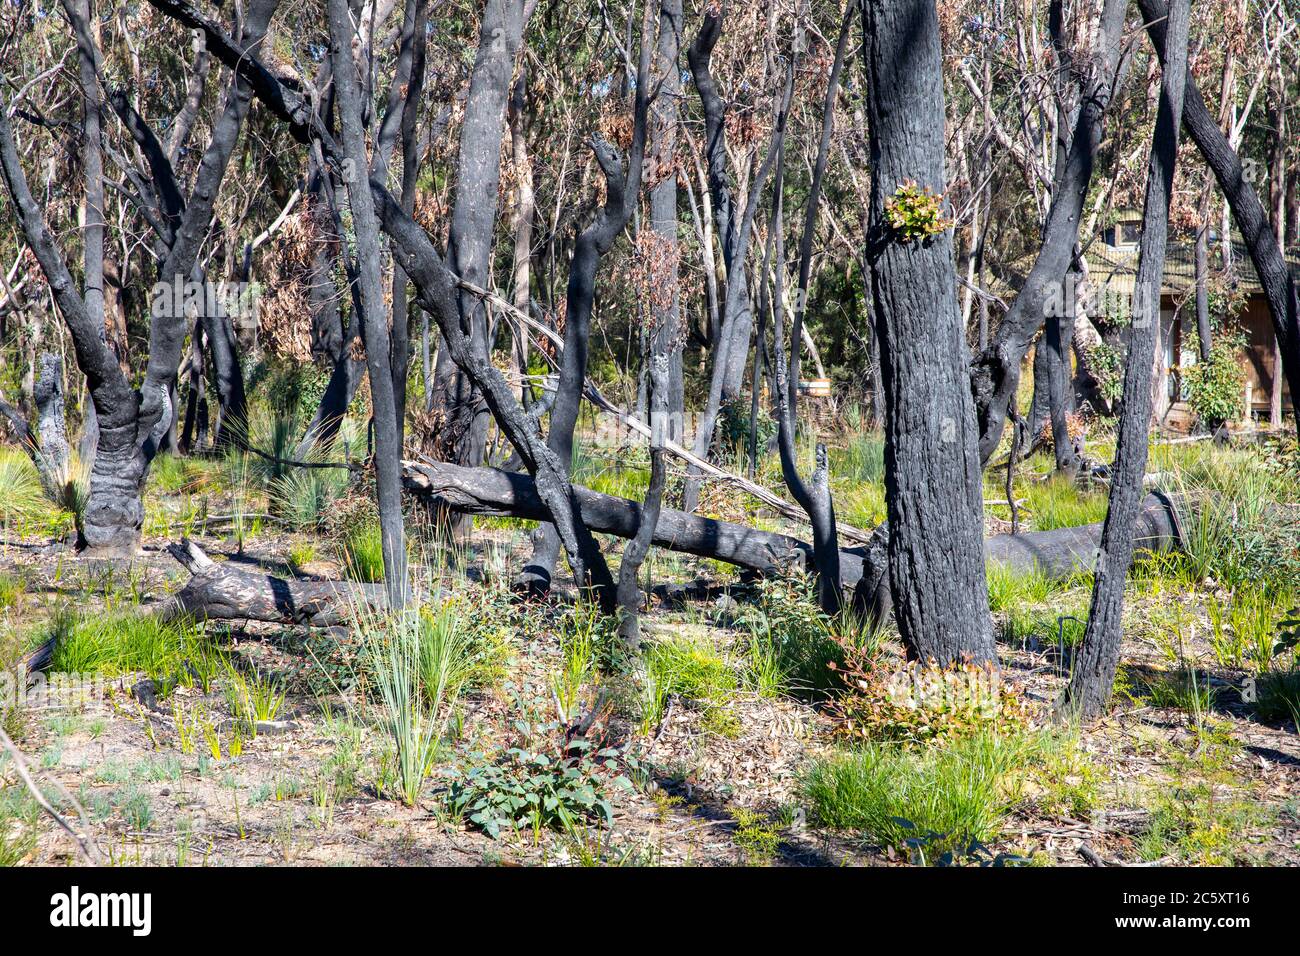 Blue mountains bush fires in 2020 caused widespread damage, rejuvenation of the bush has commenced amongst blackened trees,NSW,Australia Stock Photo